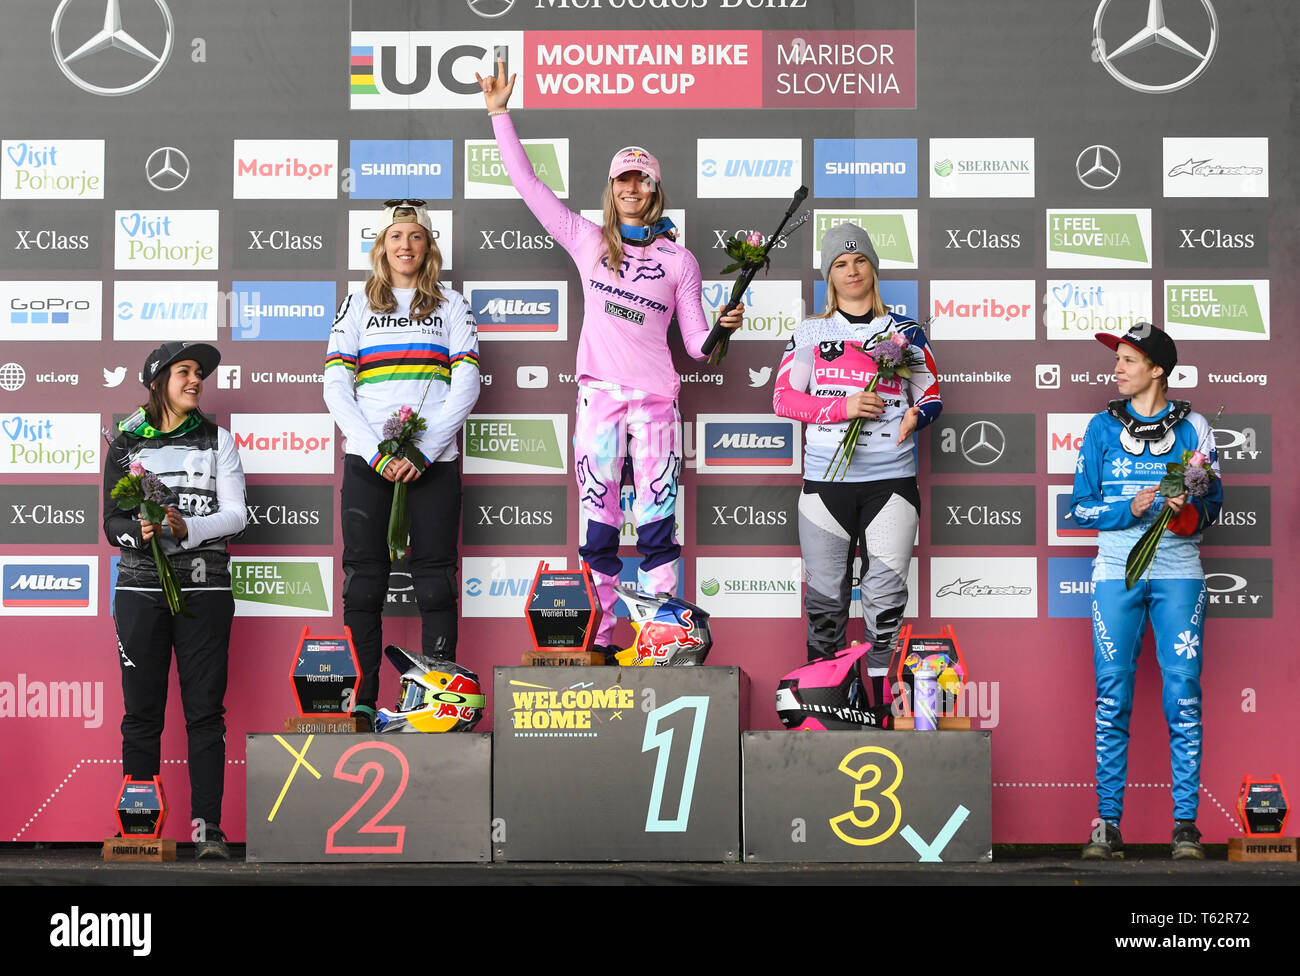 From left to right, fourth Marine Cabirou of France, second Rachel Atherton of Great Britain, first Tahnee Seagrave Great Britain, third Tracey Hannah and fifth Monika Hrastnik of Slovenia are seen on the podium after the UCI Mountain Bike World Cup Finals in Maribor. Stock Photo